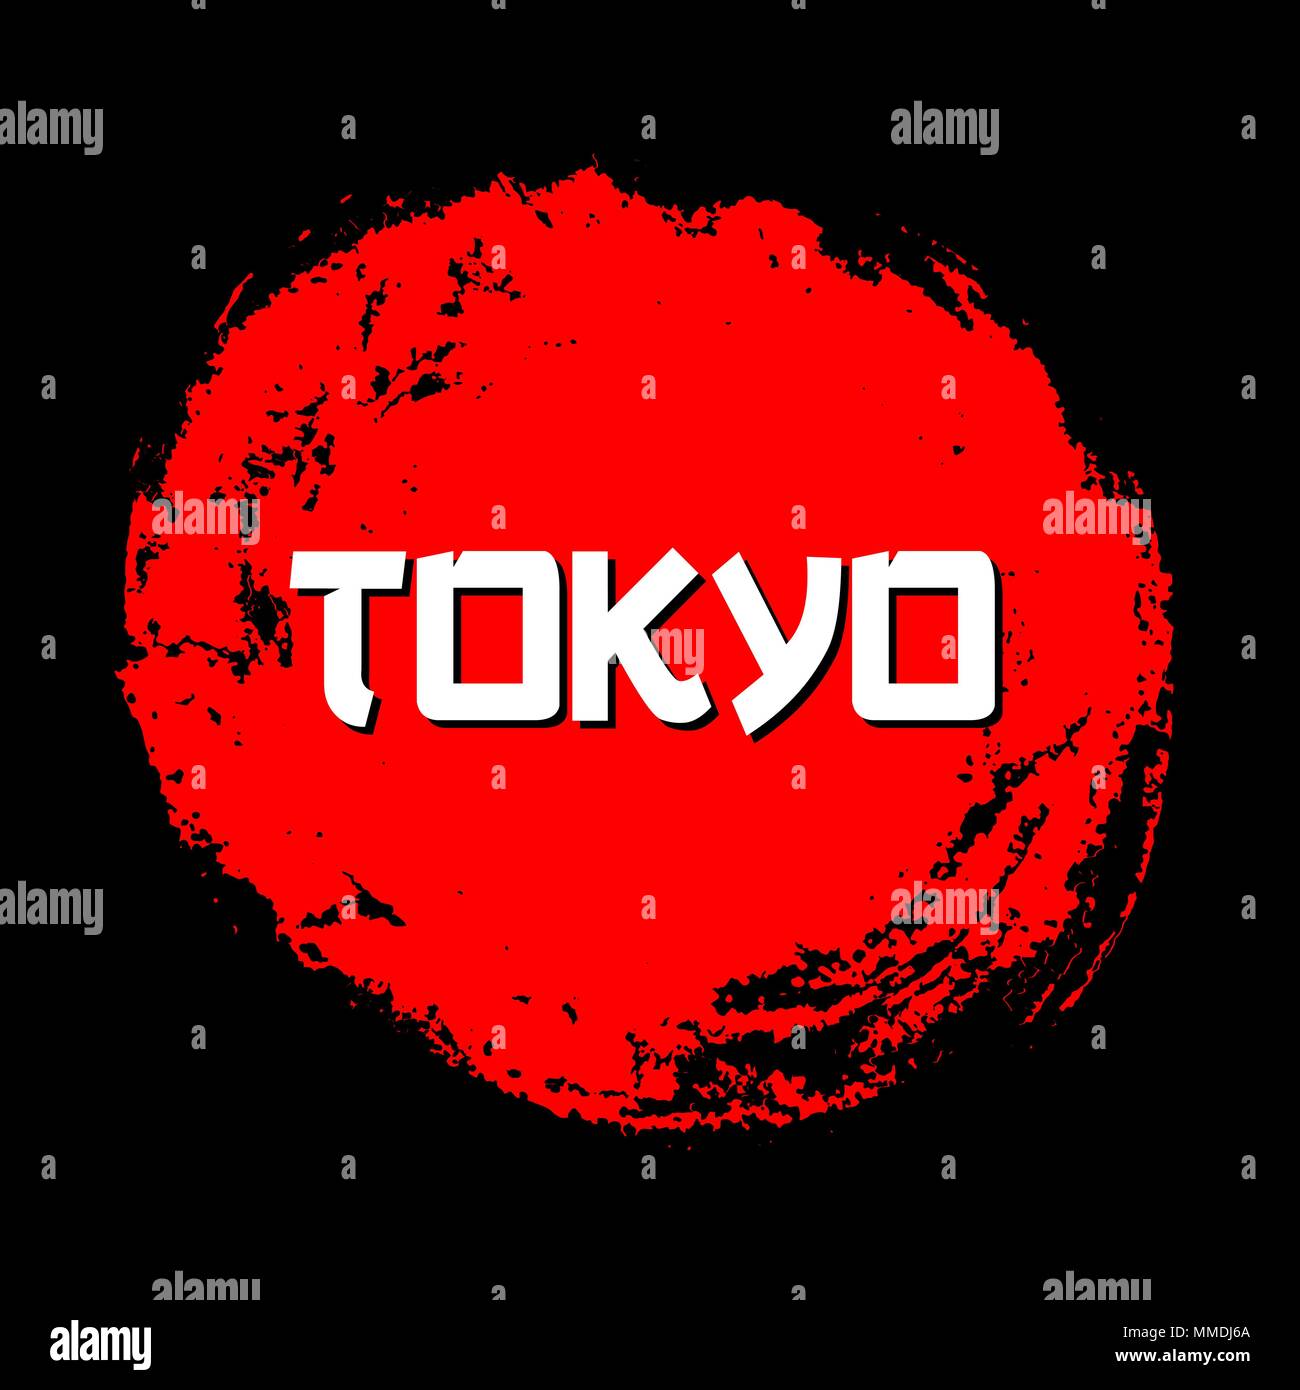 Tokyo Red Sign Vector. Grunge Red circle Stamp On Black Background. Chinese Ink Or Rubber Textured Sun Symbol Illustration. Stock Vector